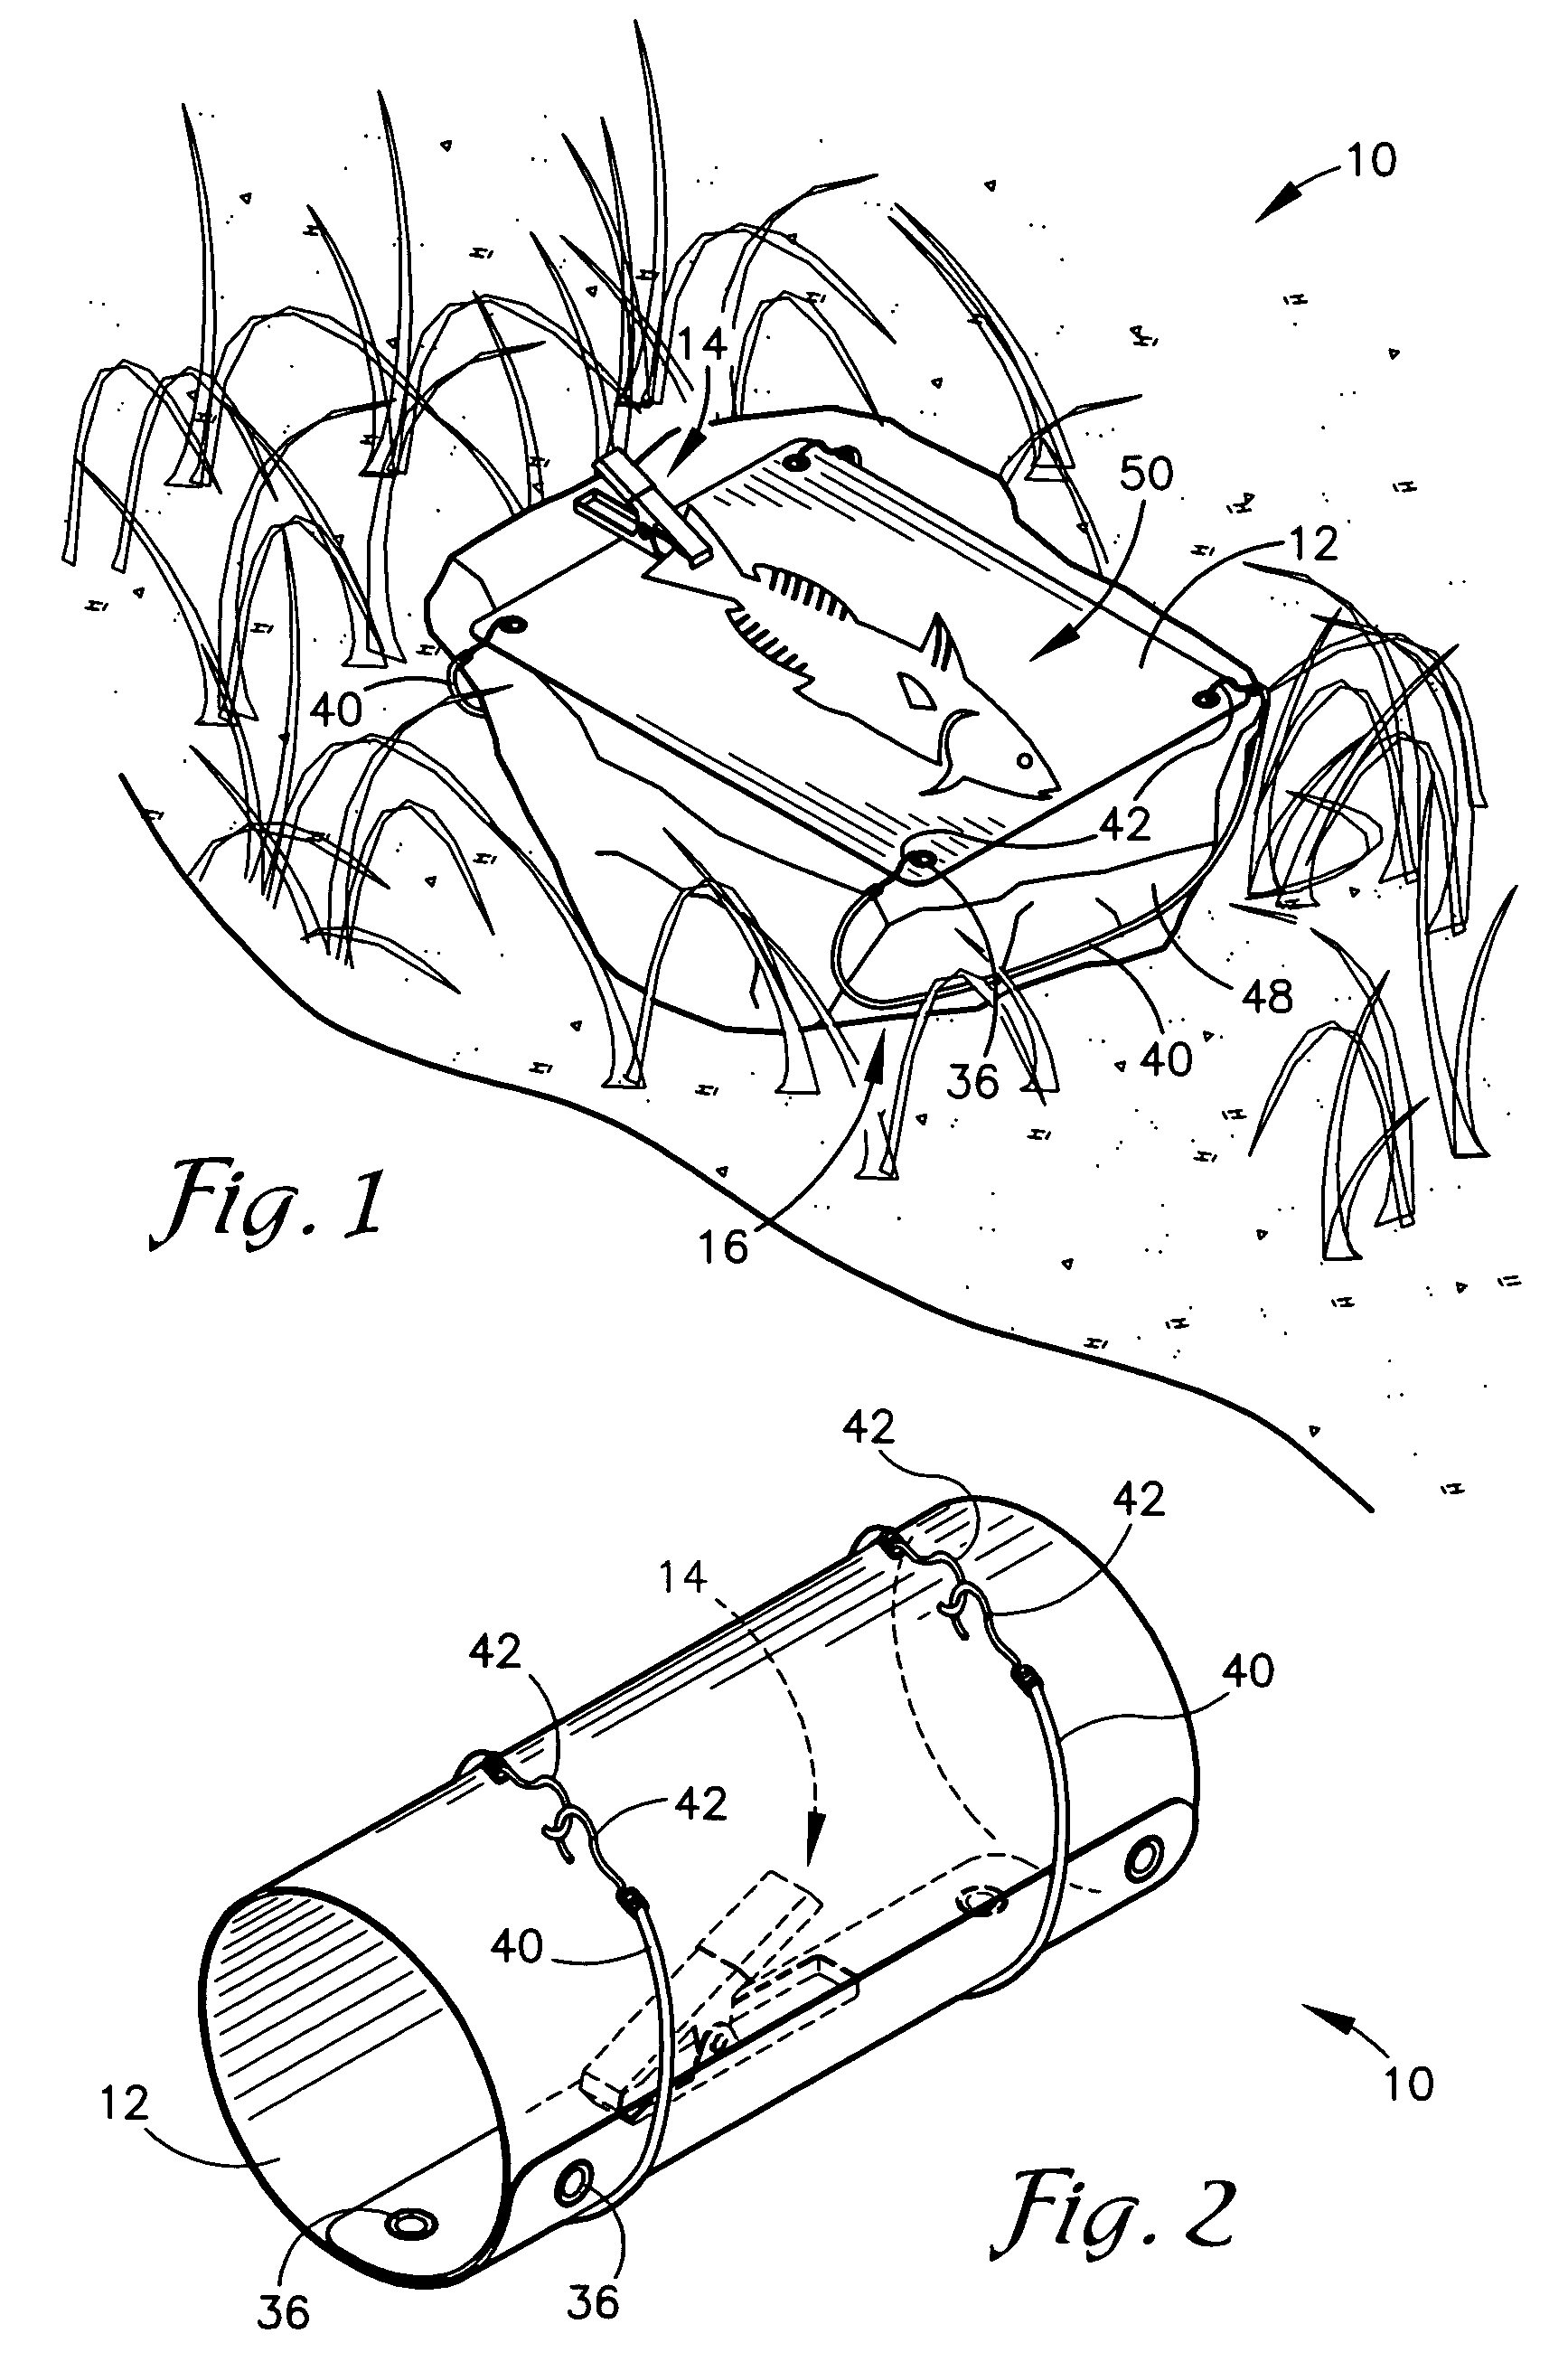 Filleting assembly and method of using same